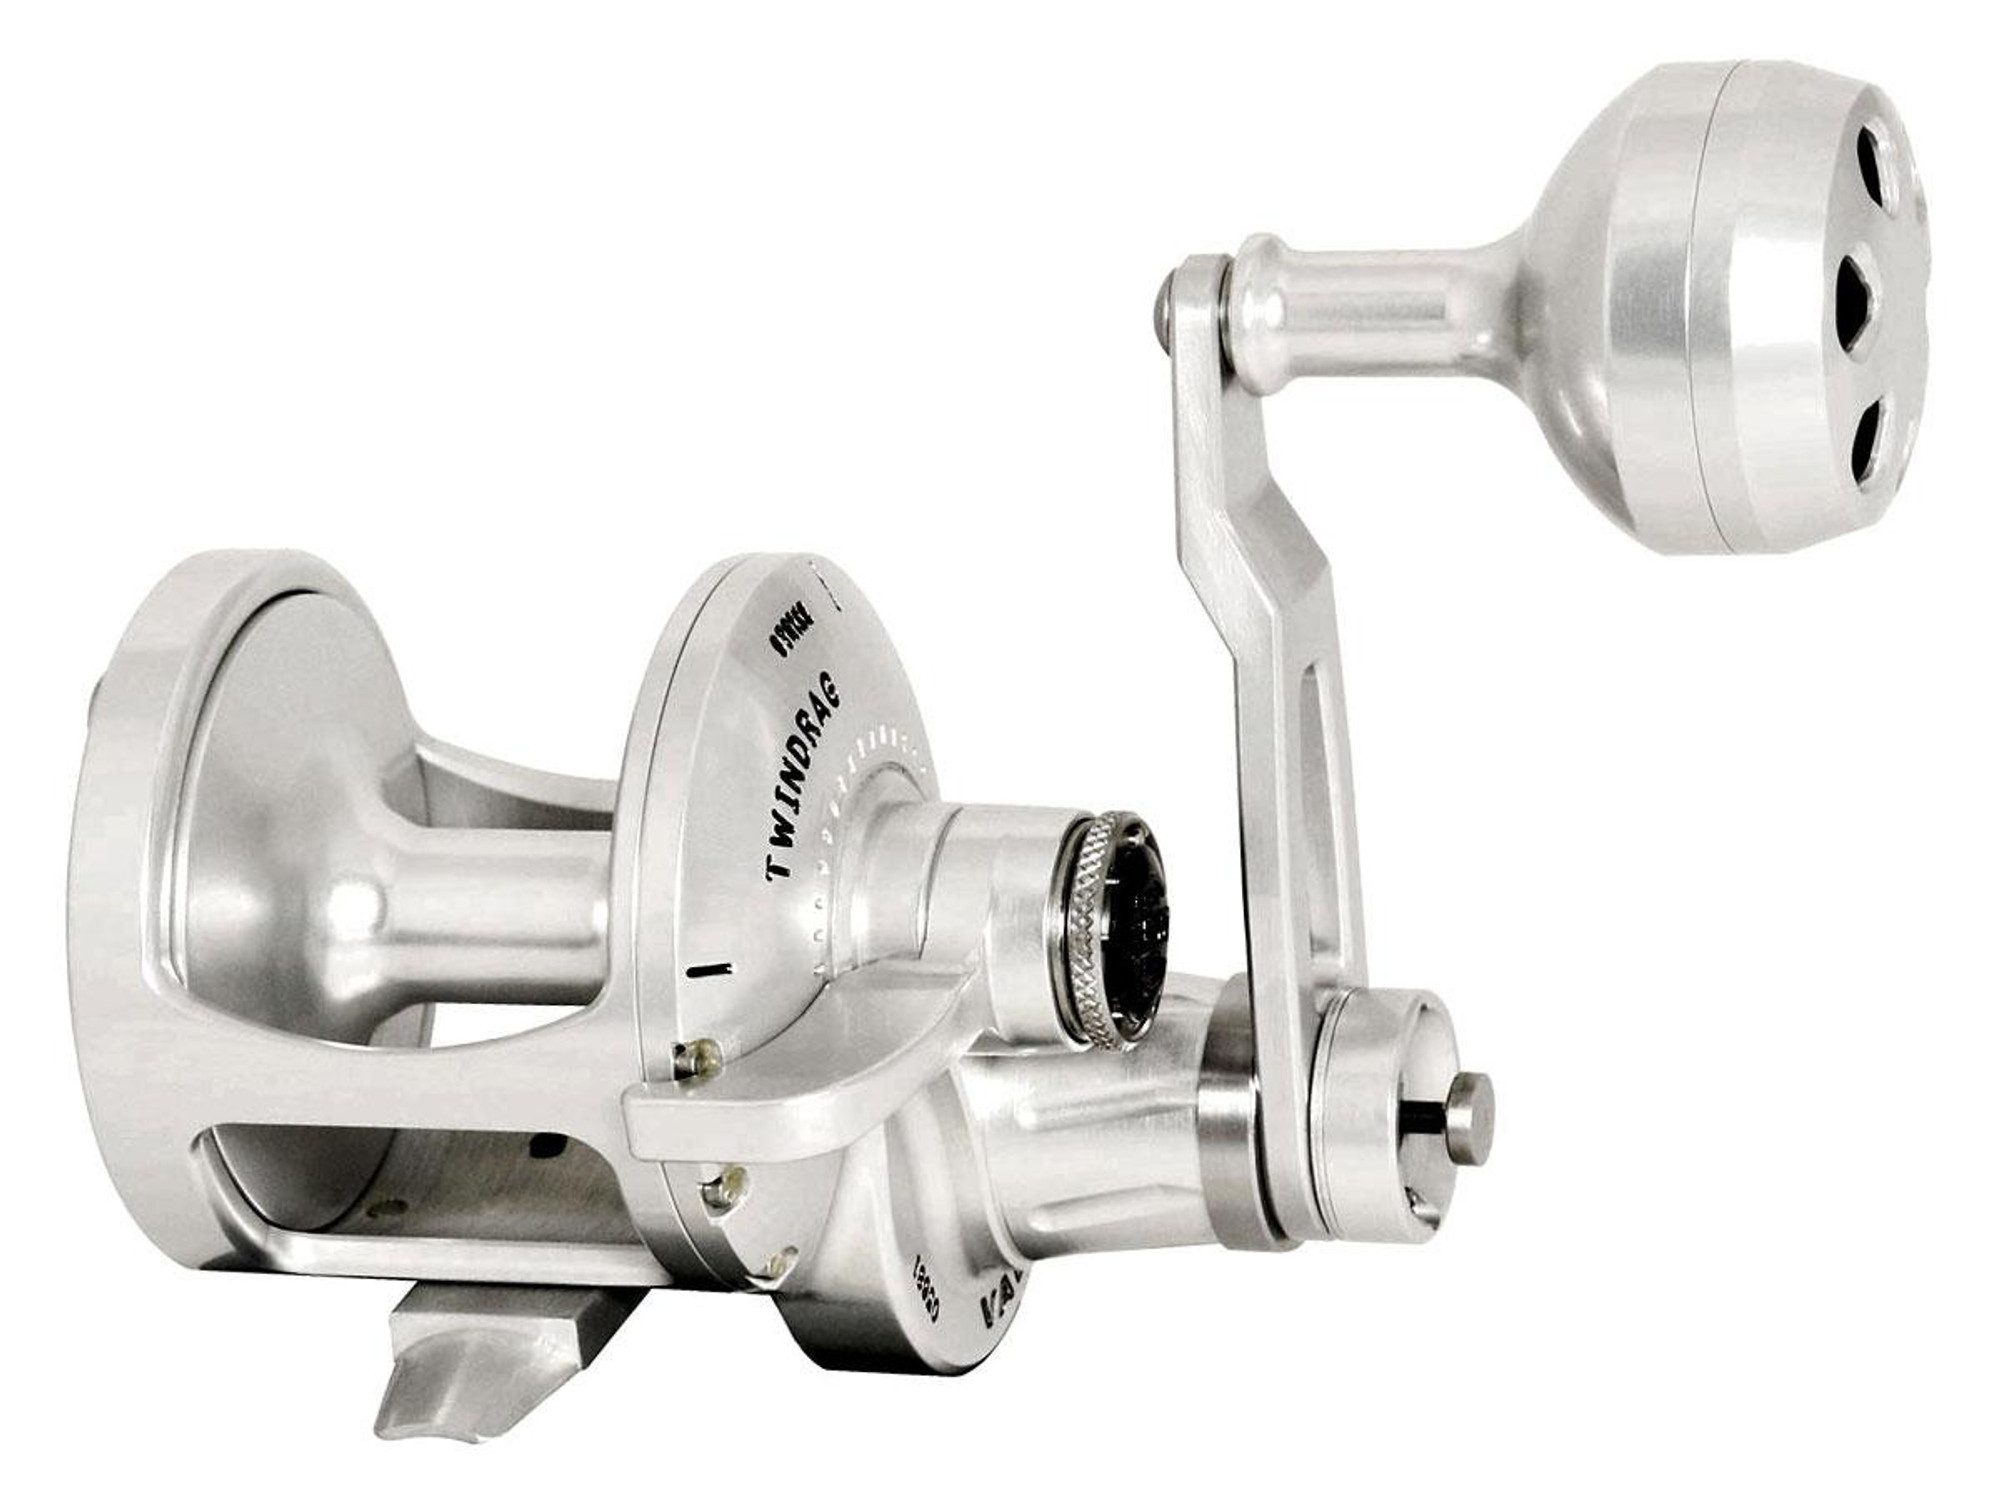 Accurate Fishing "Valiant" Series Two-Speed Fishing Reel (Size: 600N / Silver)